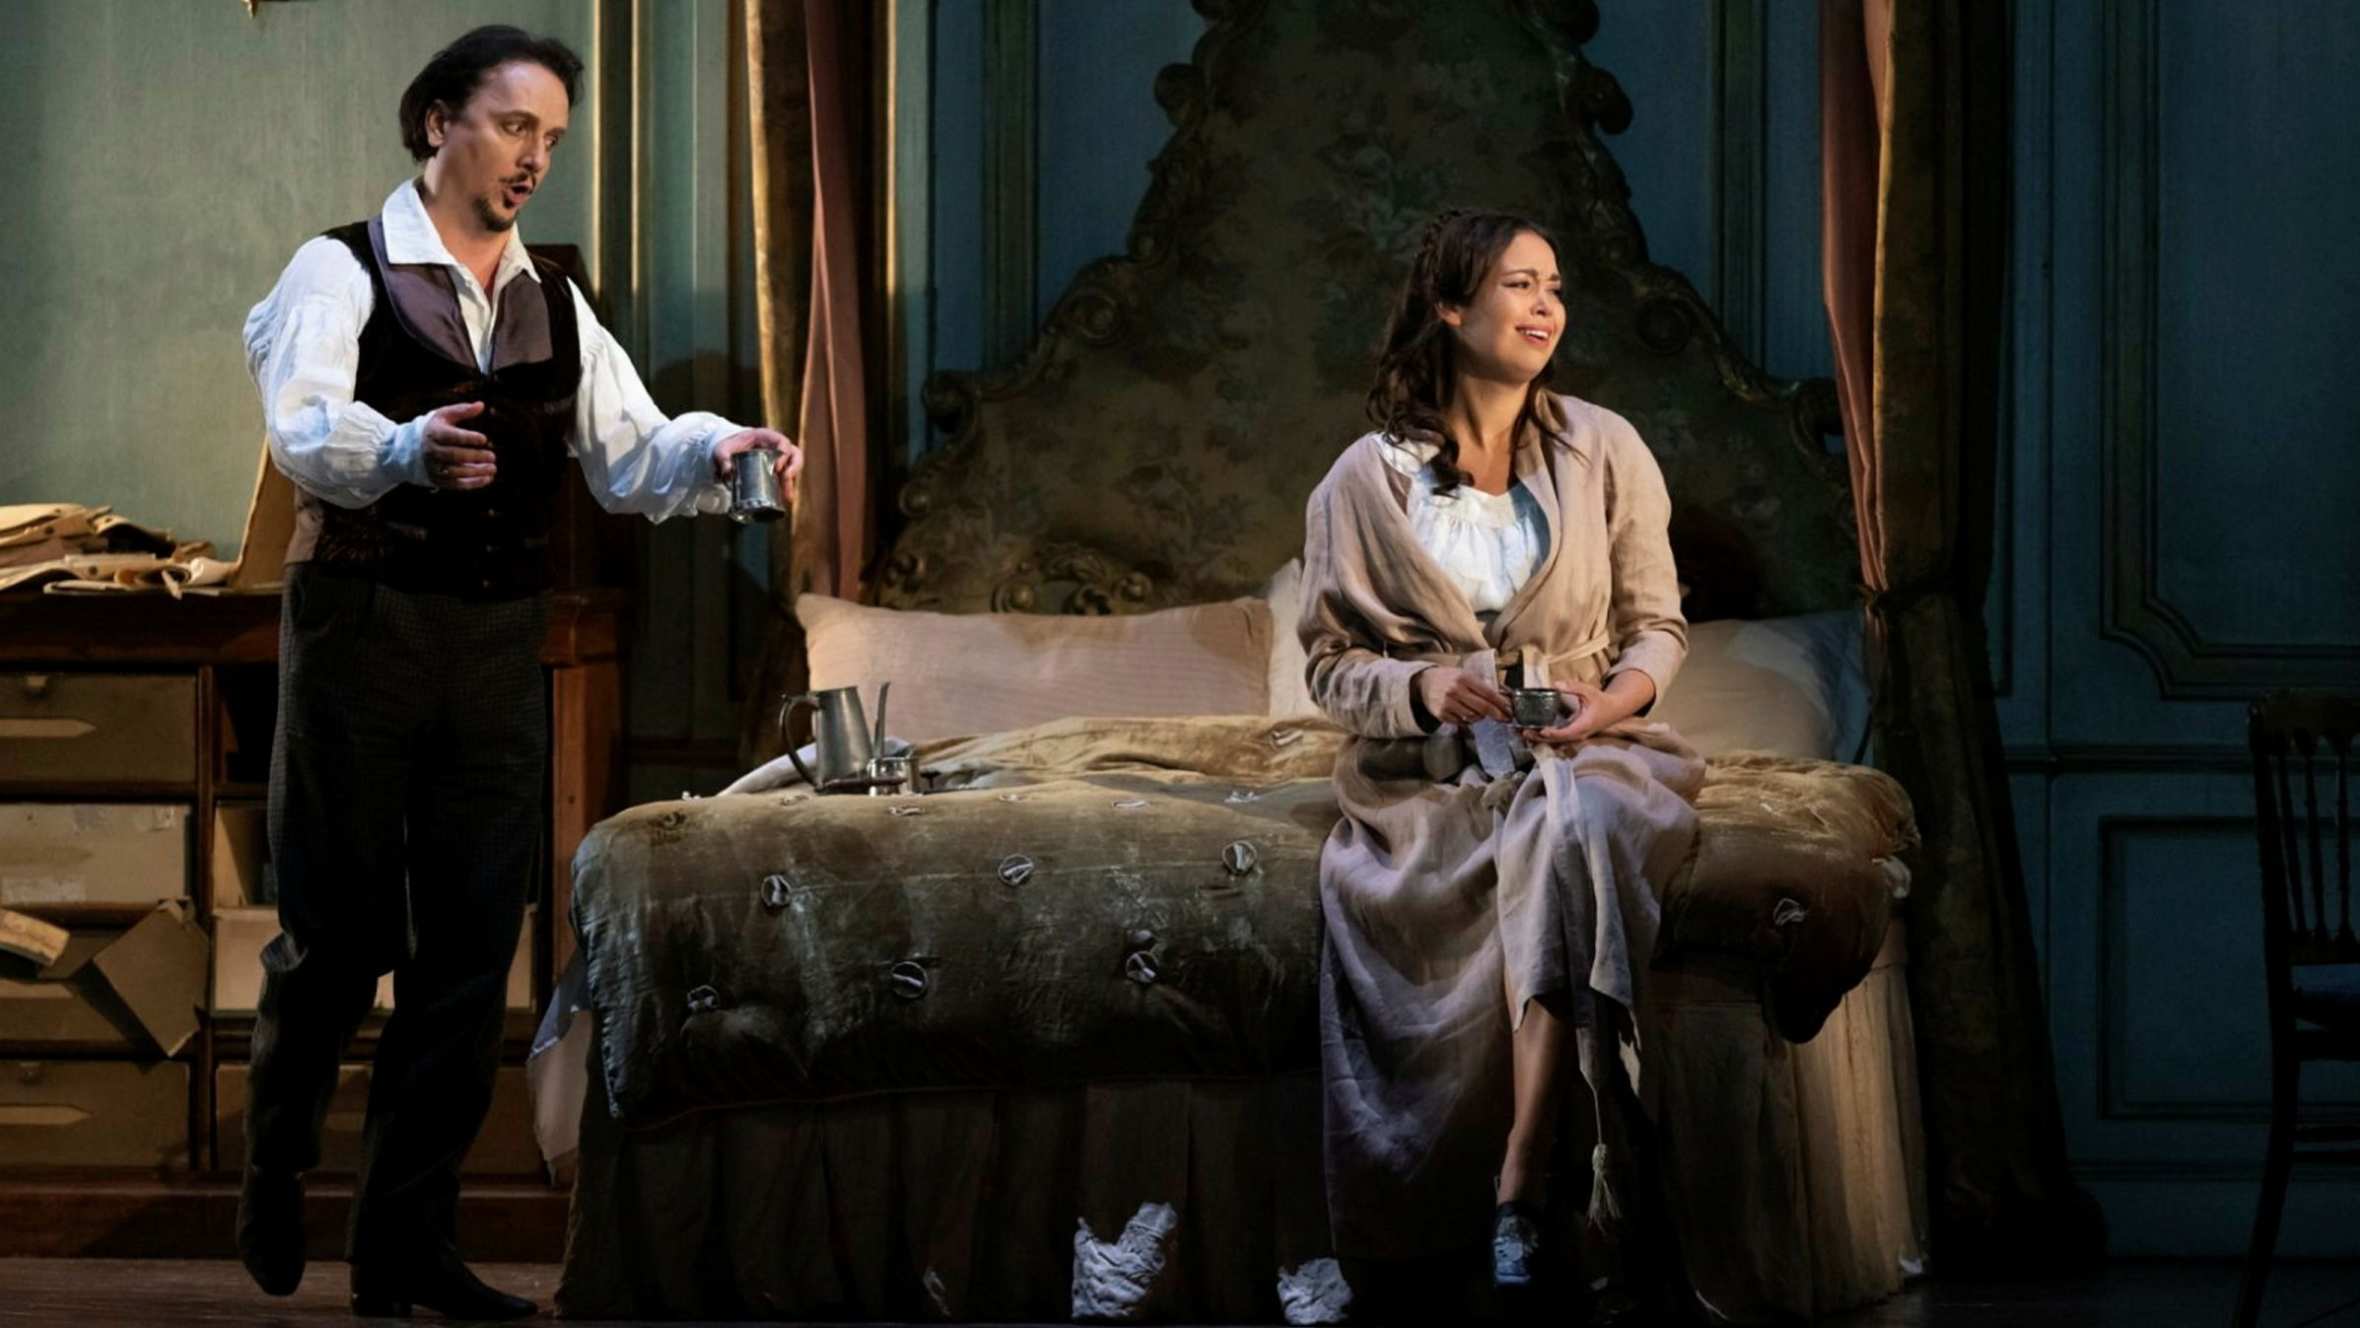 A man and a woman wearing 19th-century costumes are in a bedroom; the man stands singing passionately to the woman, who sits on the bed with her head turned away from him